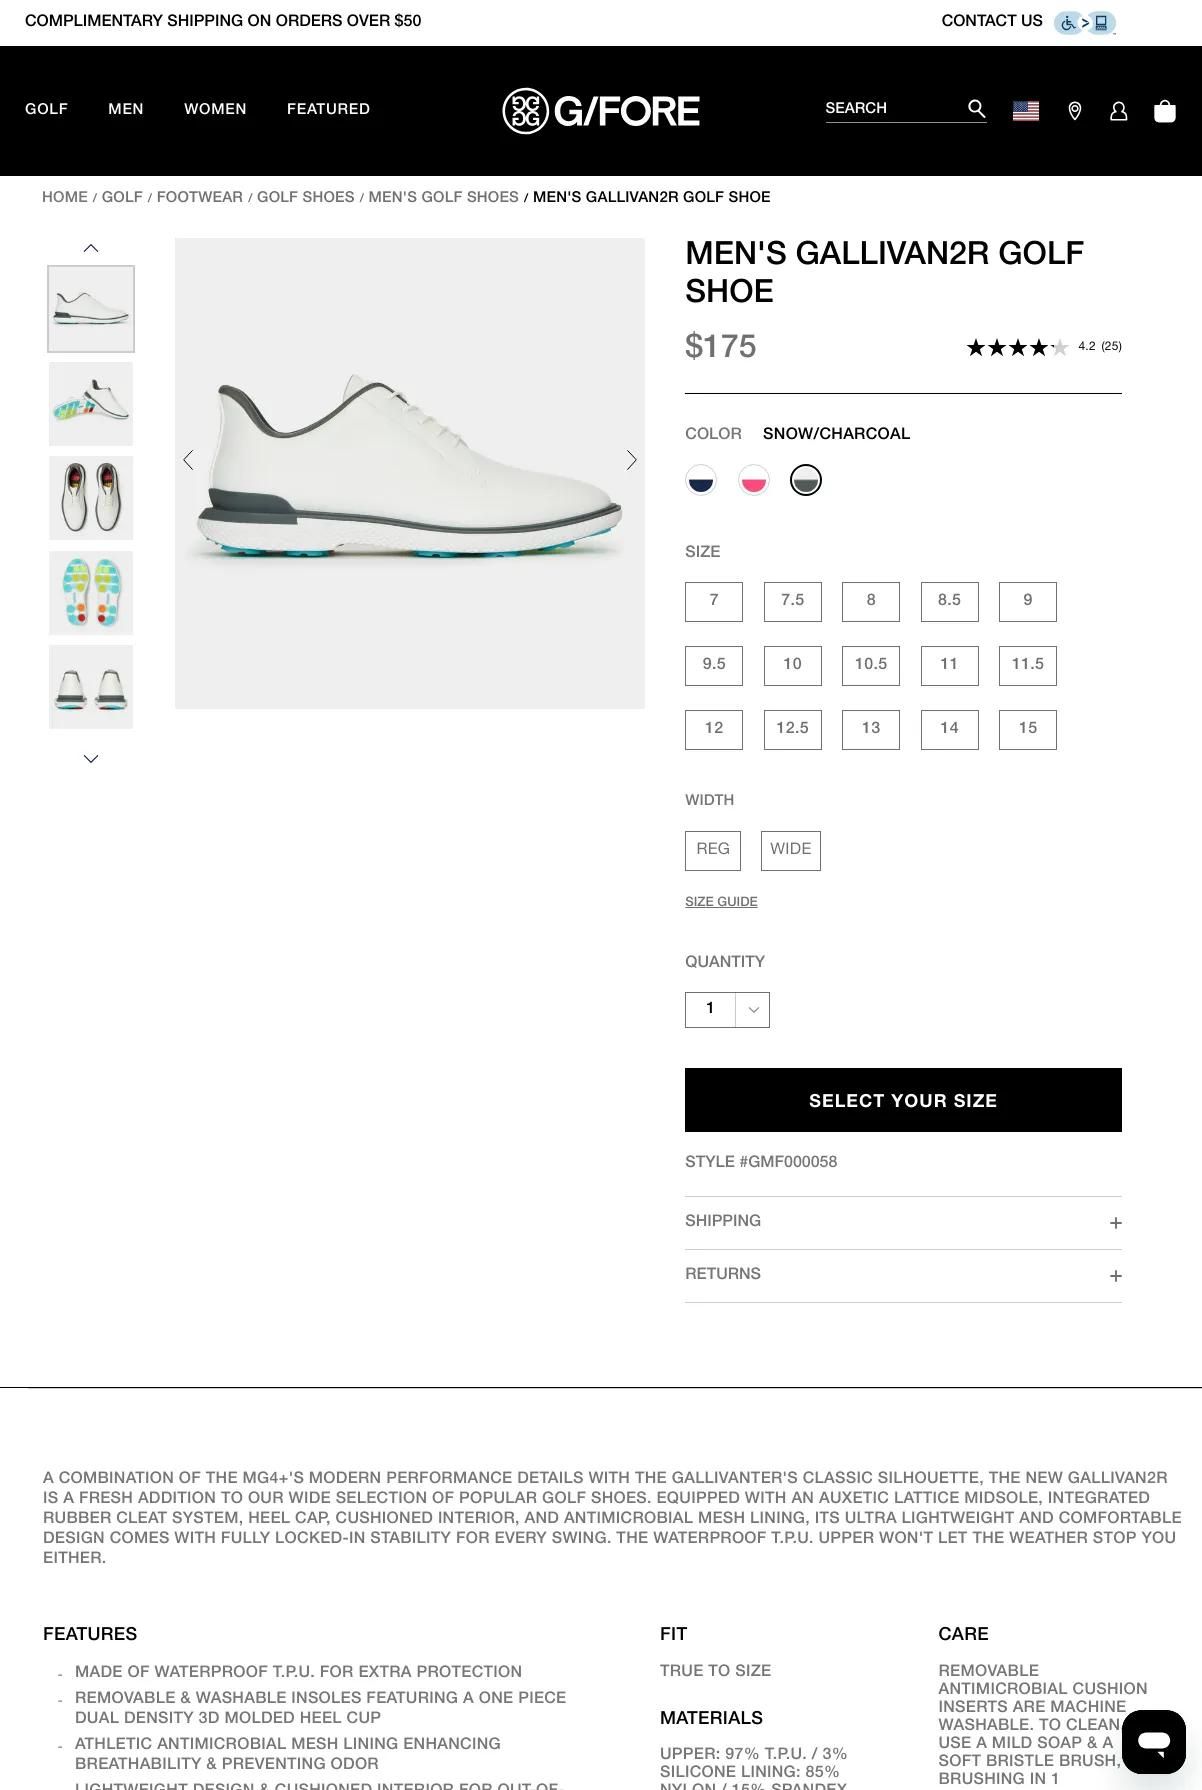 Screenshot 3 of G/FORE (Example Shopify Website)